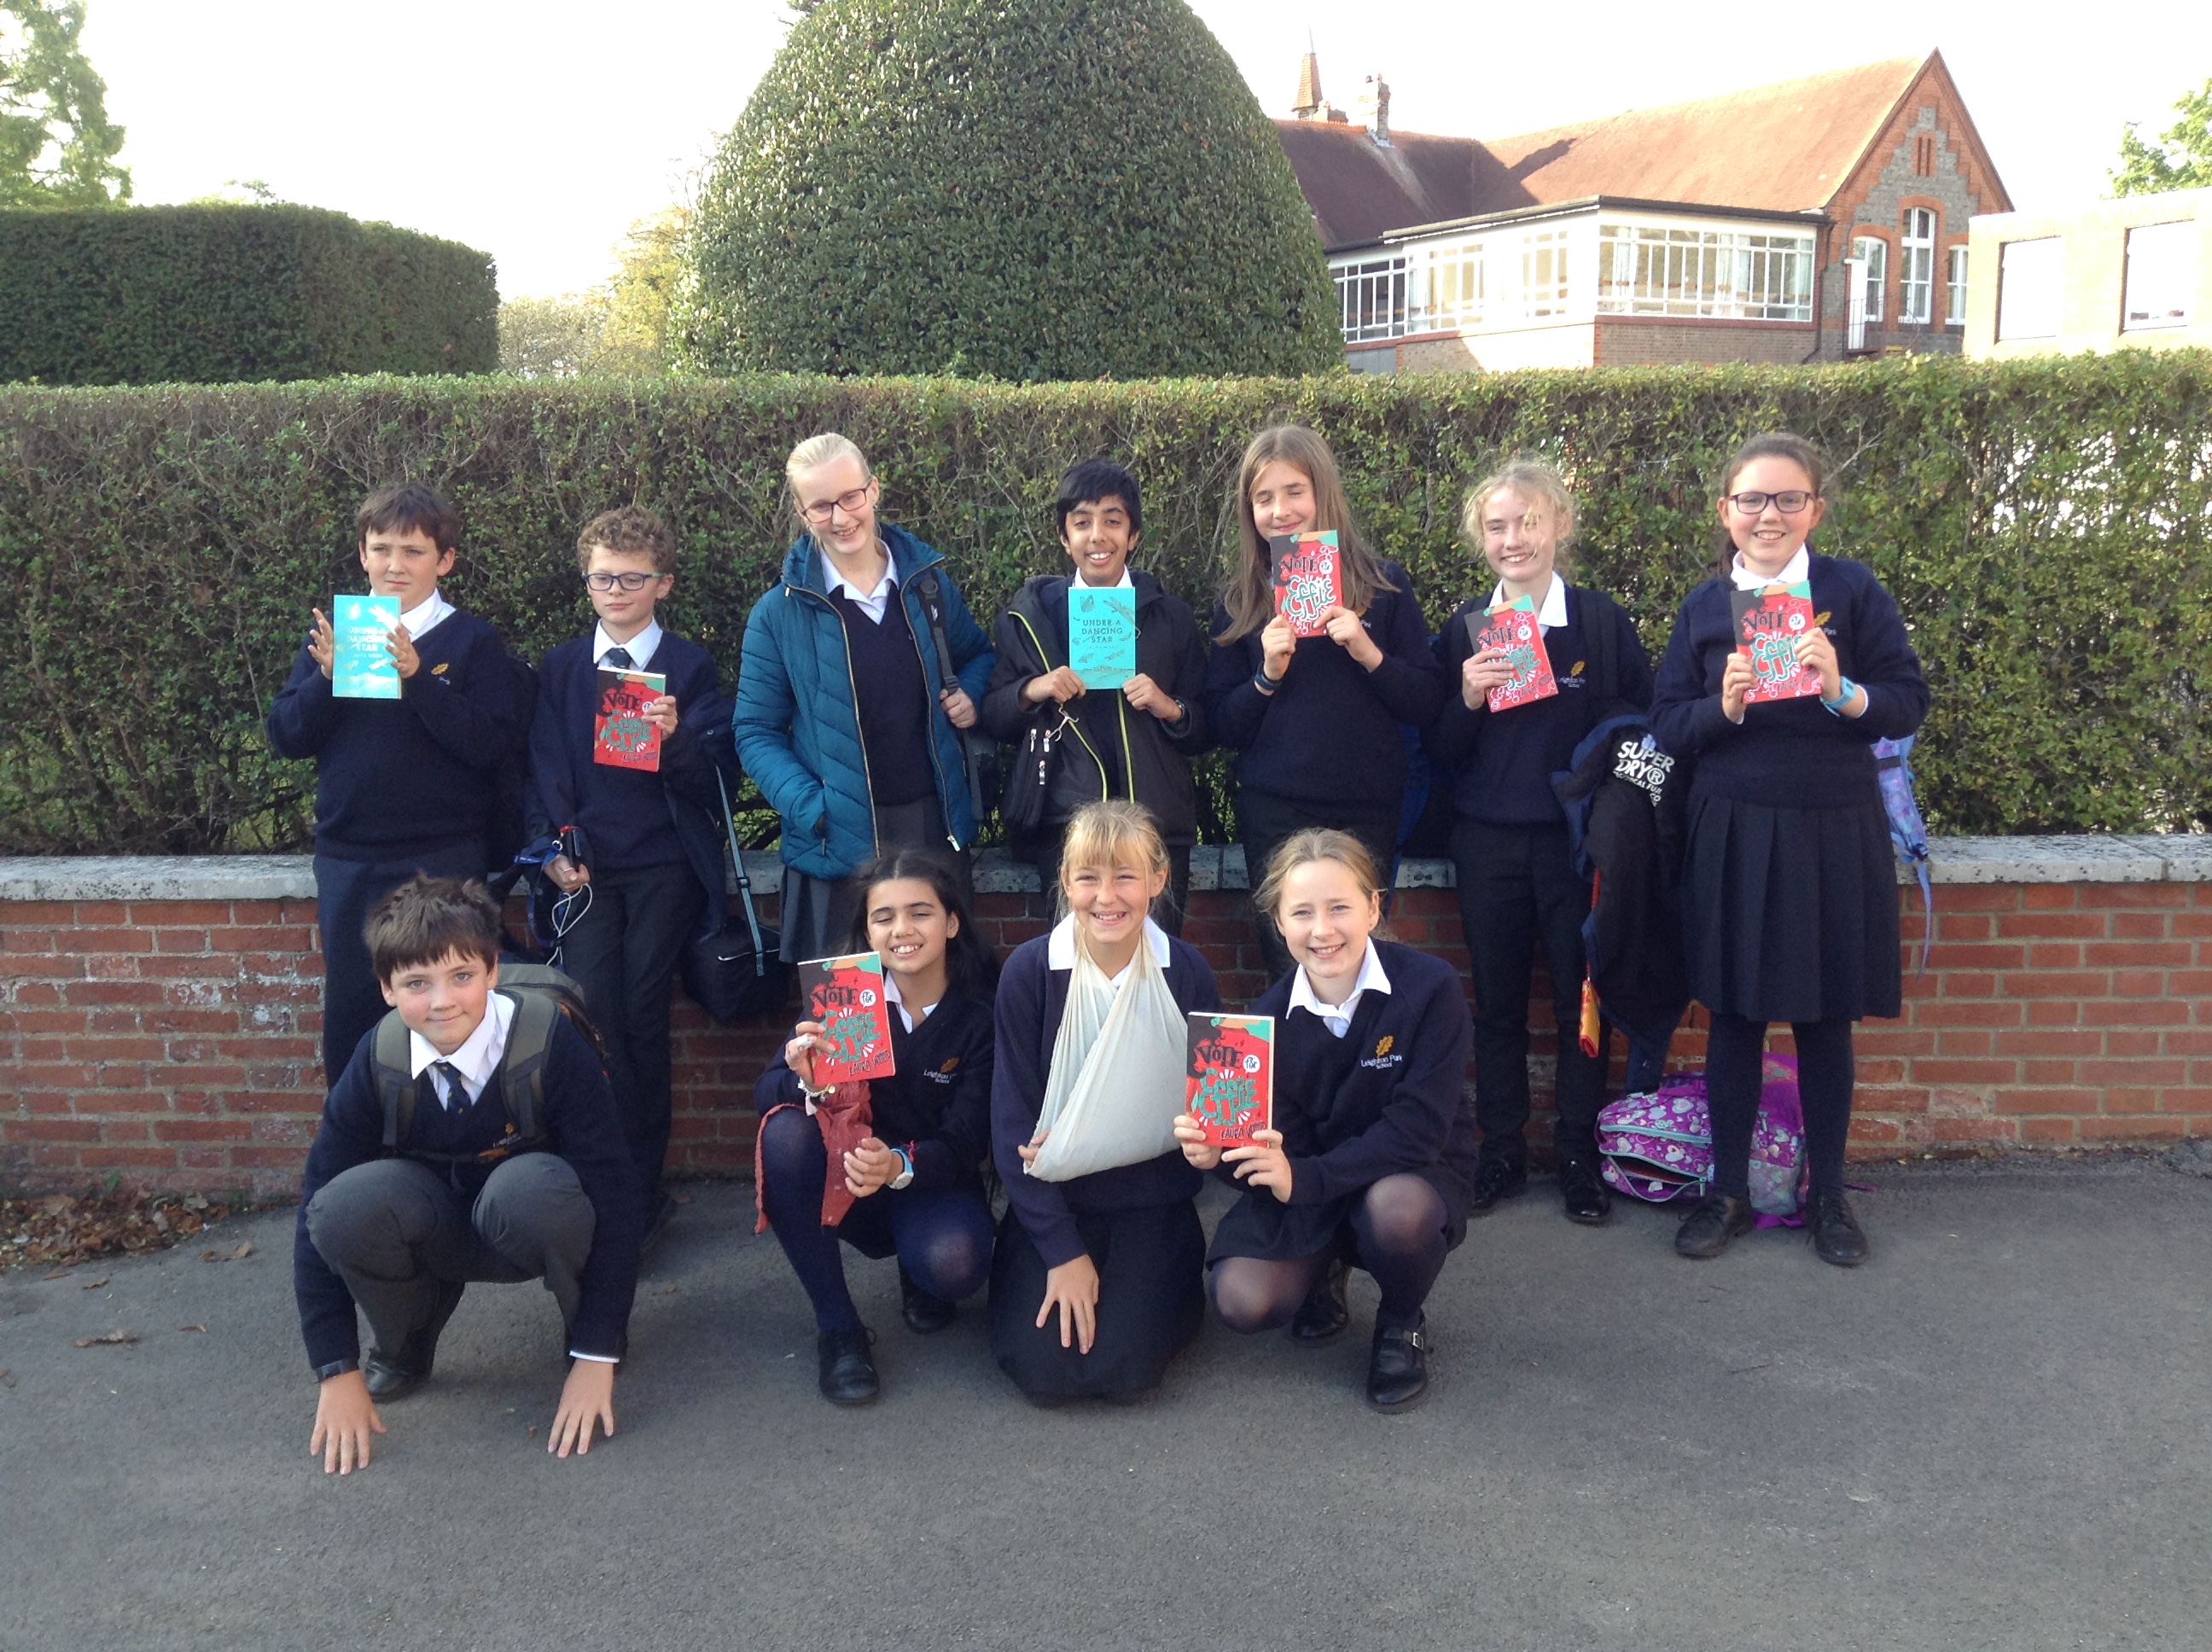 11 Leighton Park students attending the launch of the Berkshire Book Awards